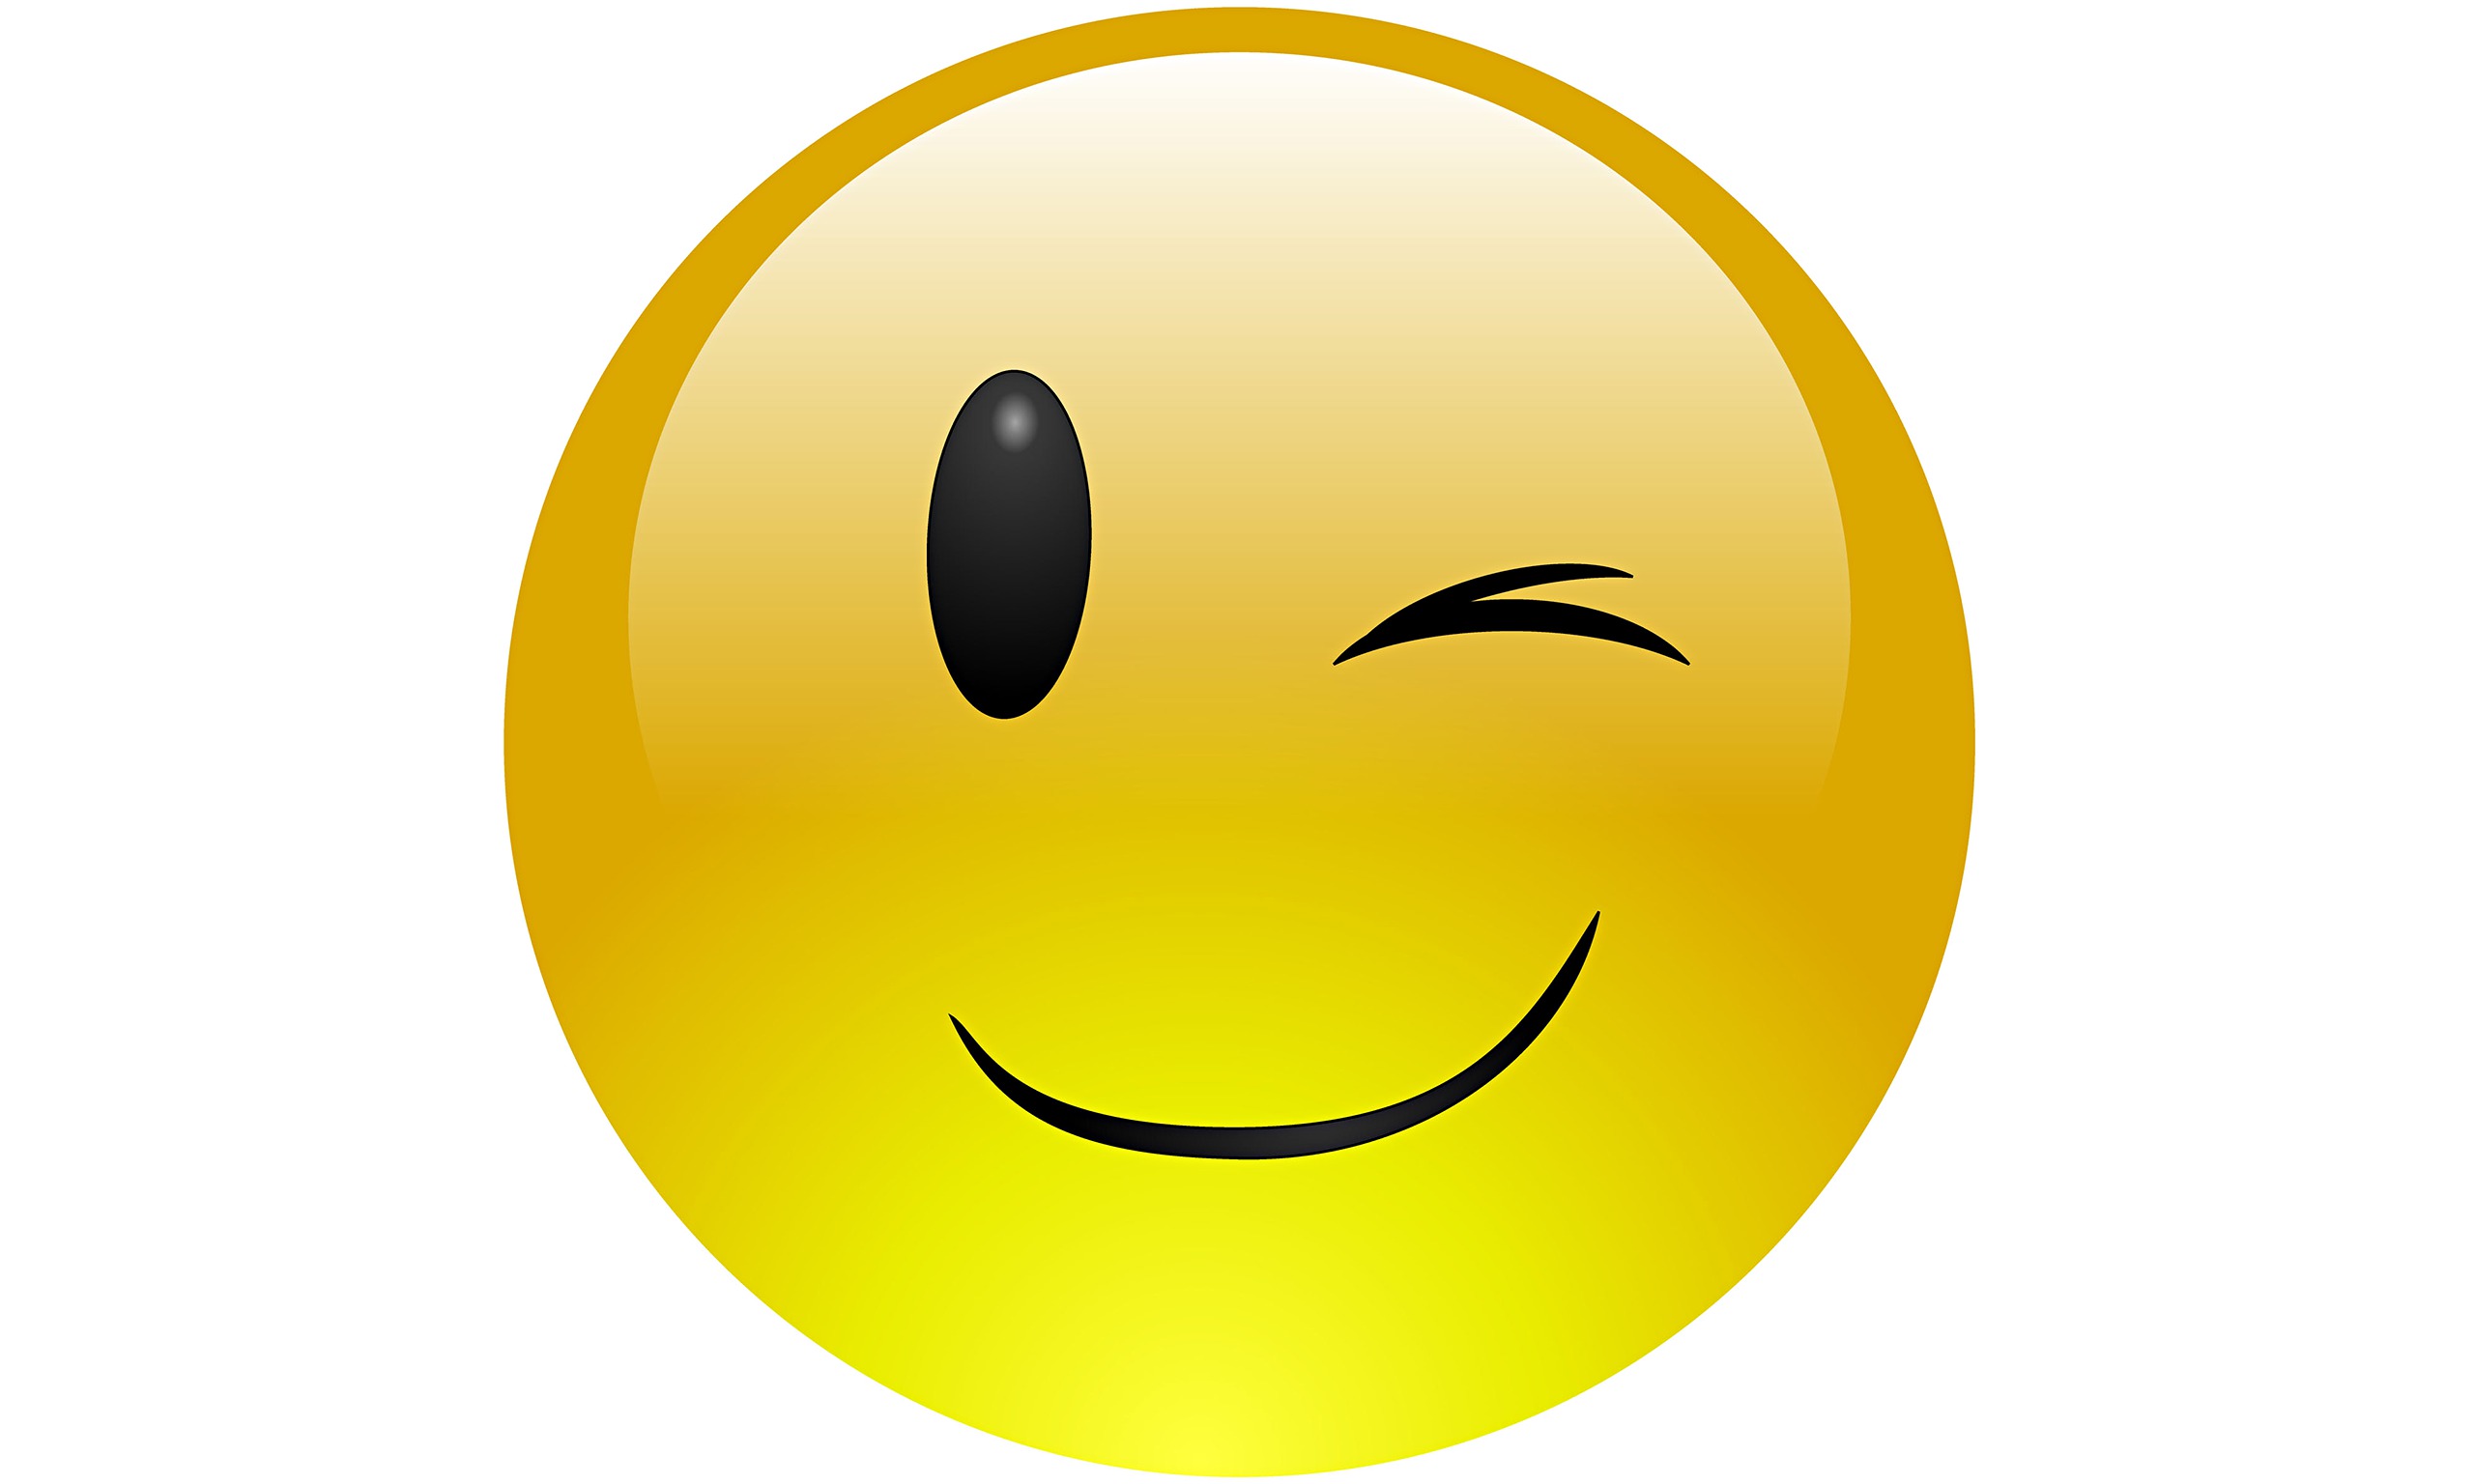 A winking, smiling emoticon